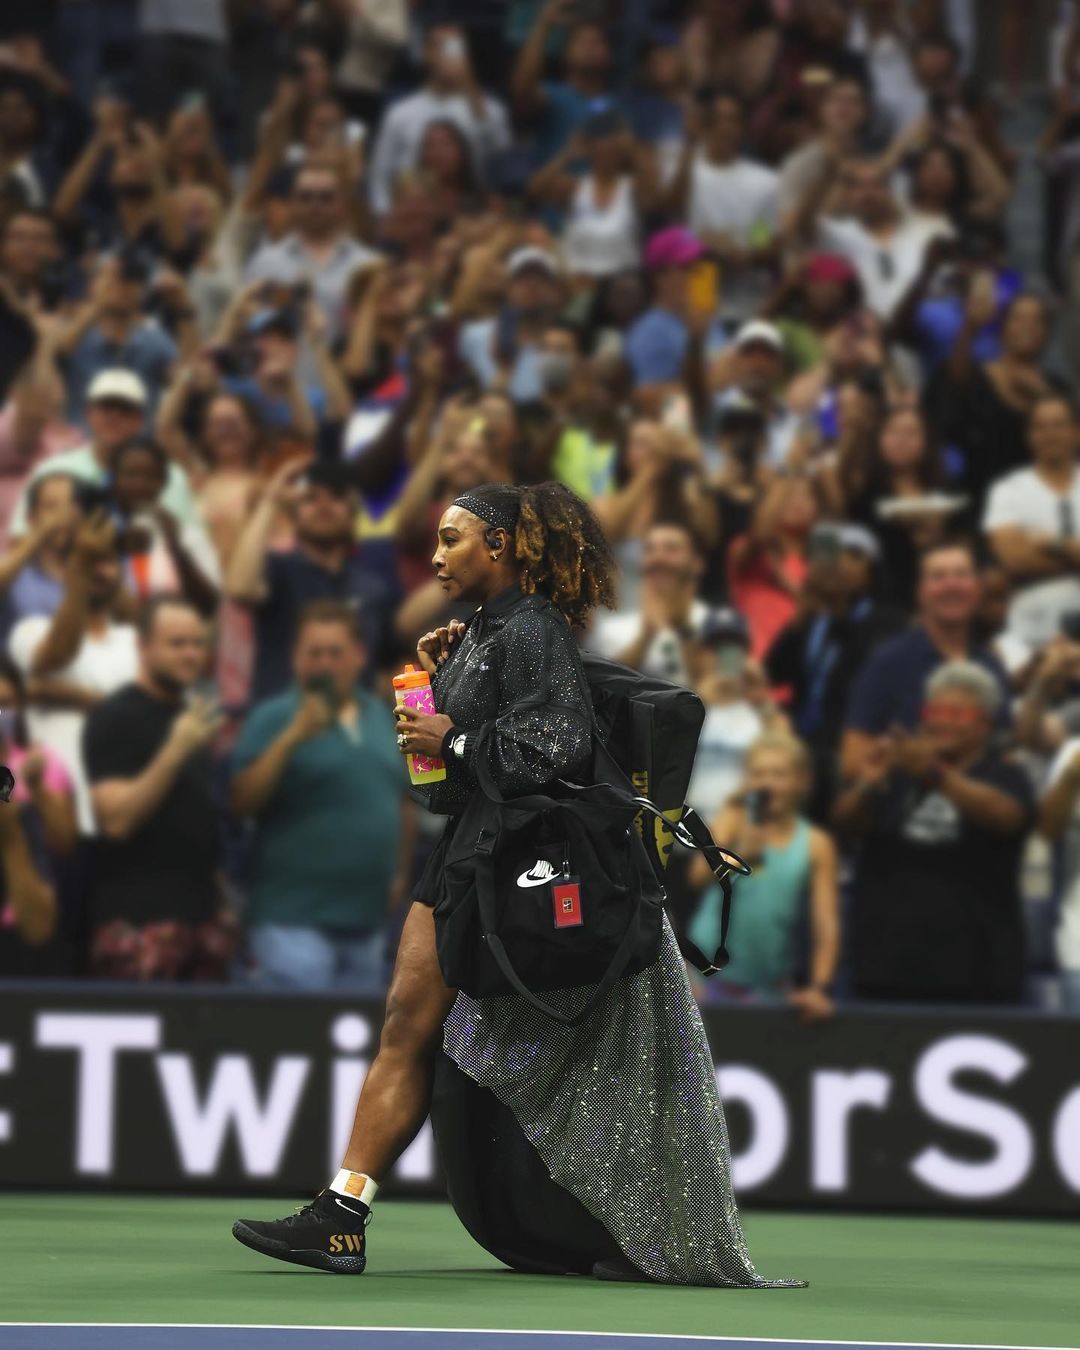 Serena Williams wears diamond shoes at the 2022 US Open